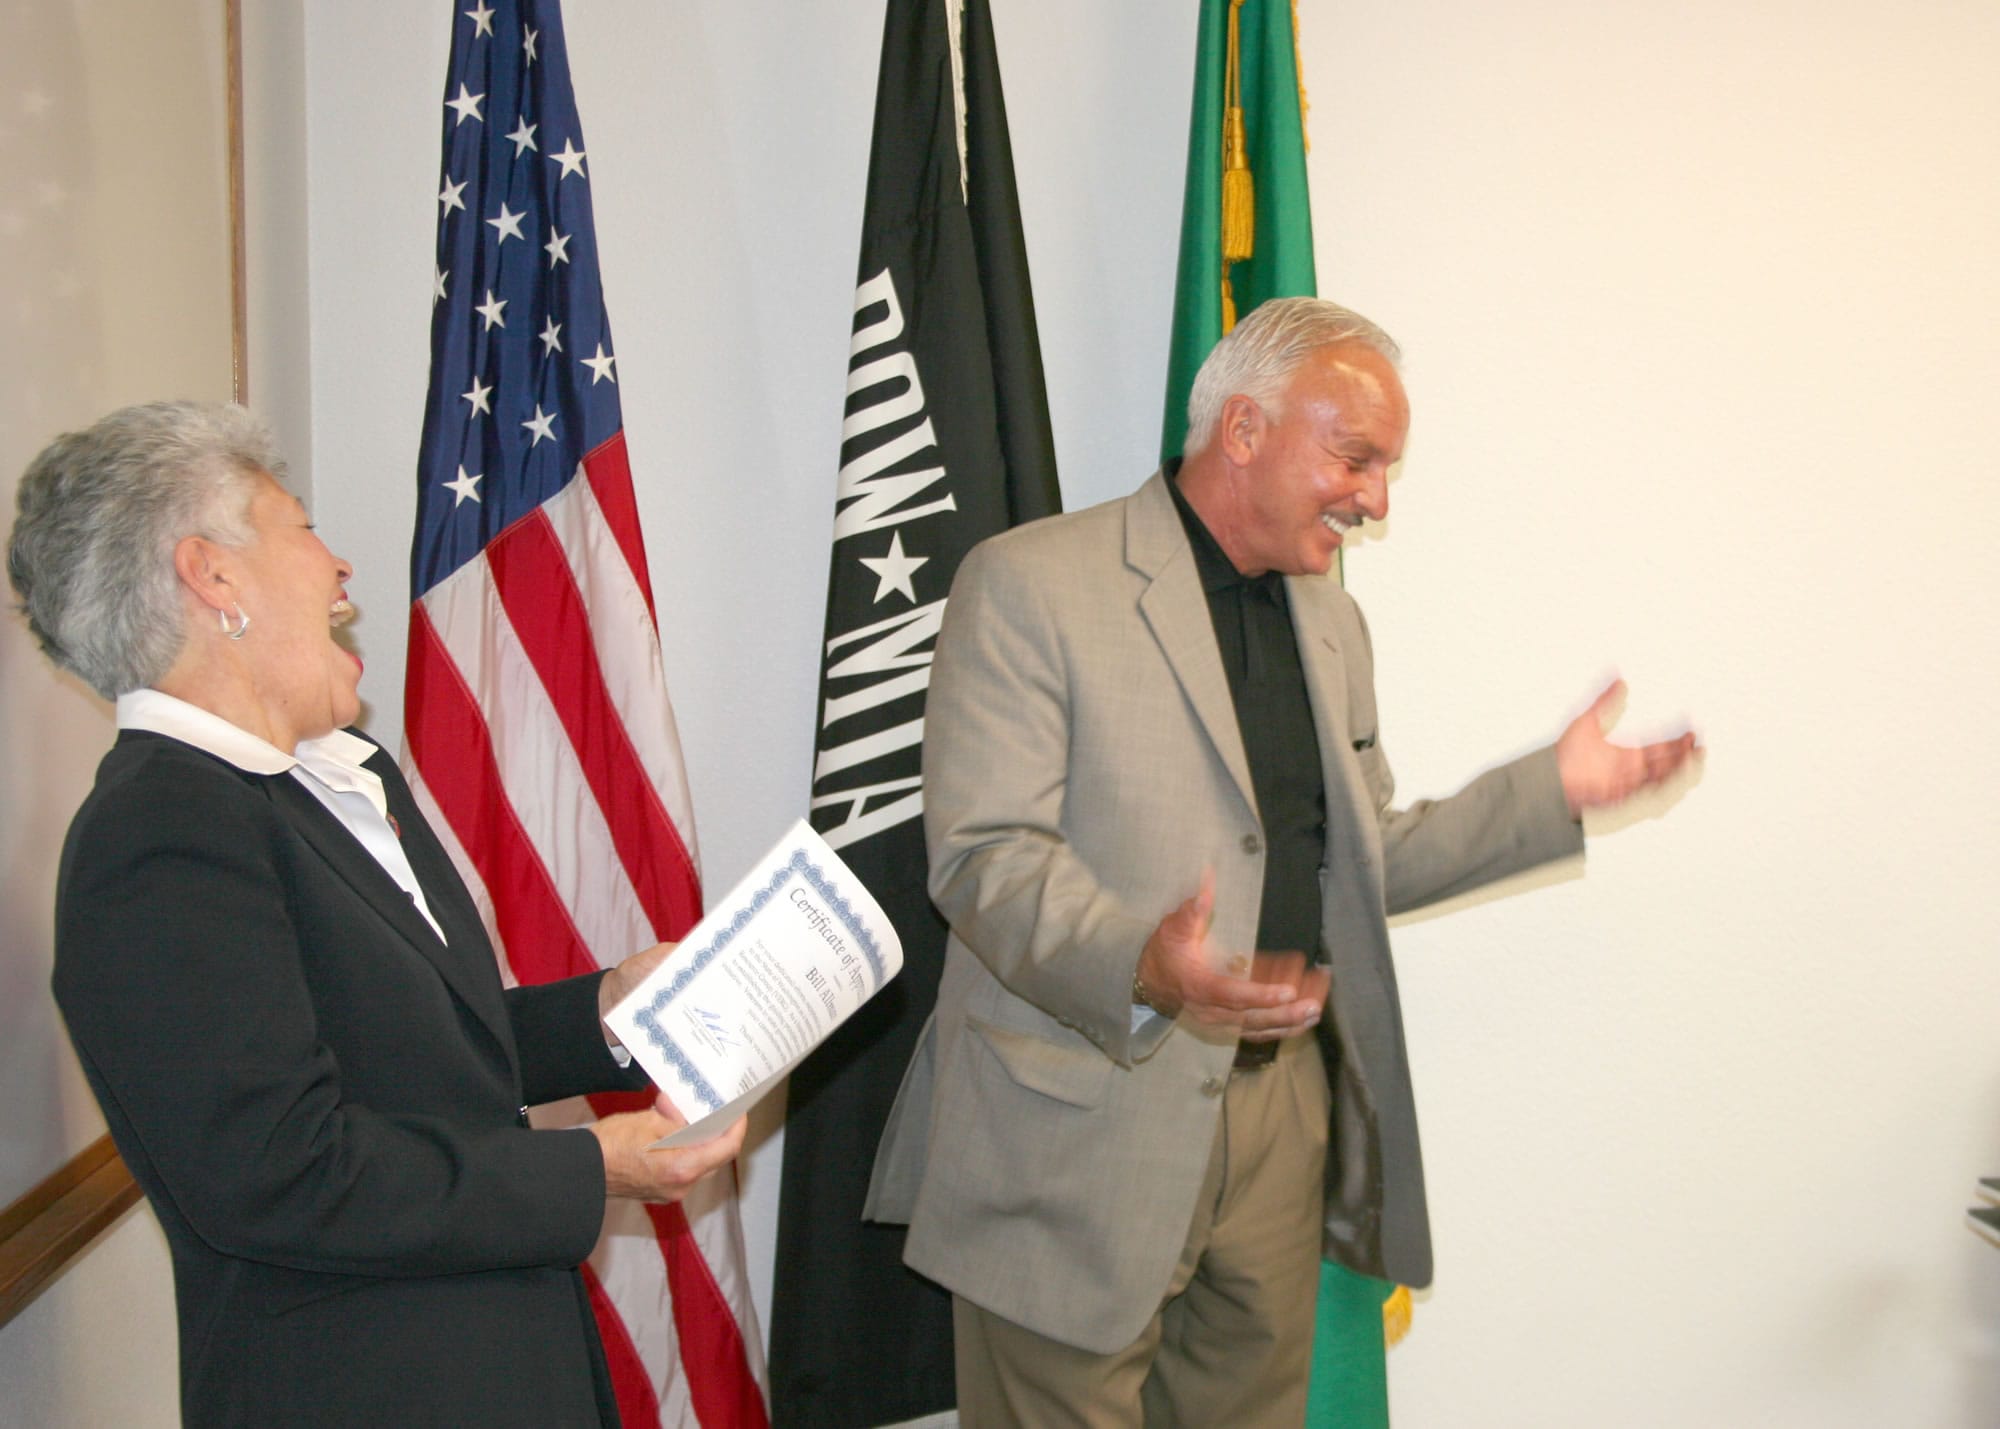 Salmon Creek: Bill Allman, a founding member of the Washington State Veterans Employee Resource Group, laughs it up while receiving a certificate of appreciation from Alfie Alvarado-Ramos, director of the Washington Department of Veterans Affairs.